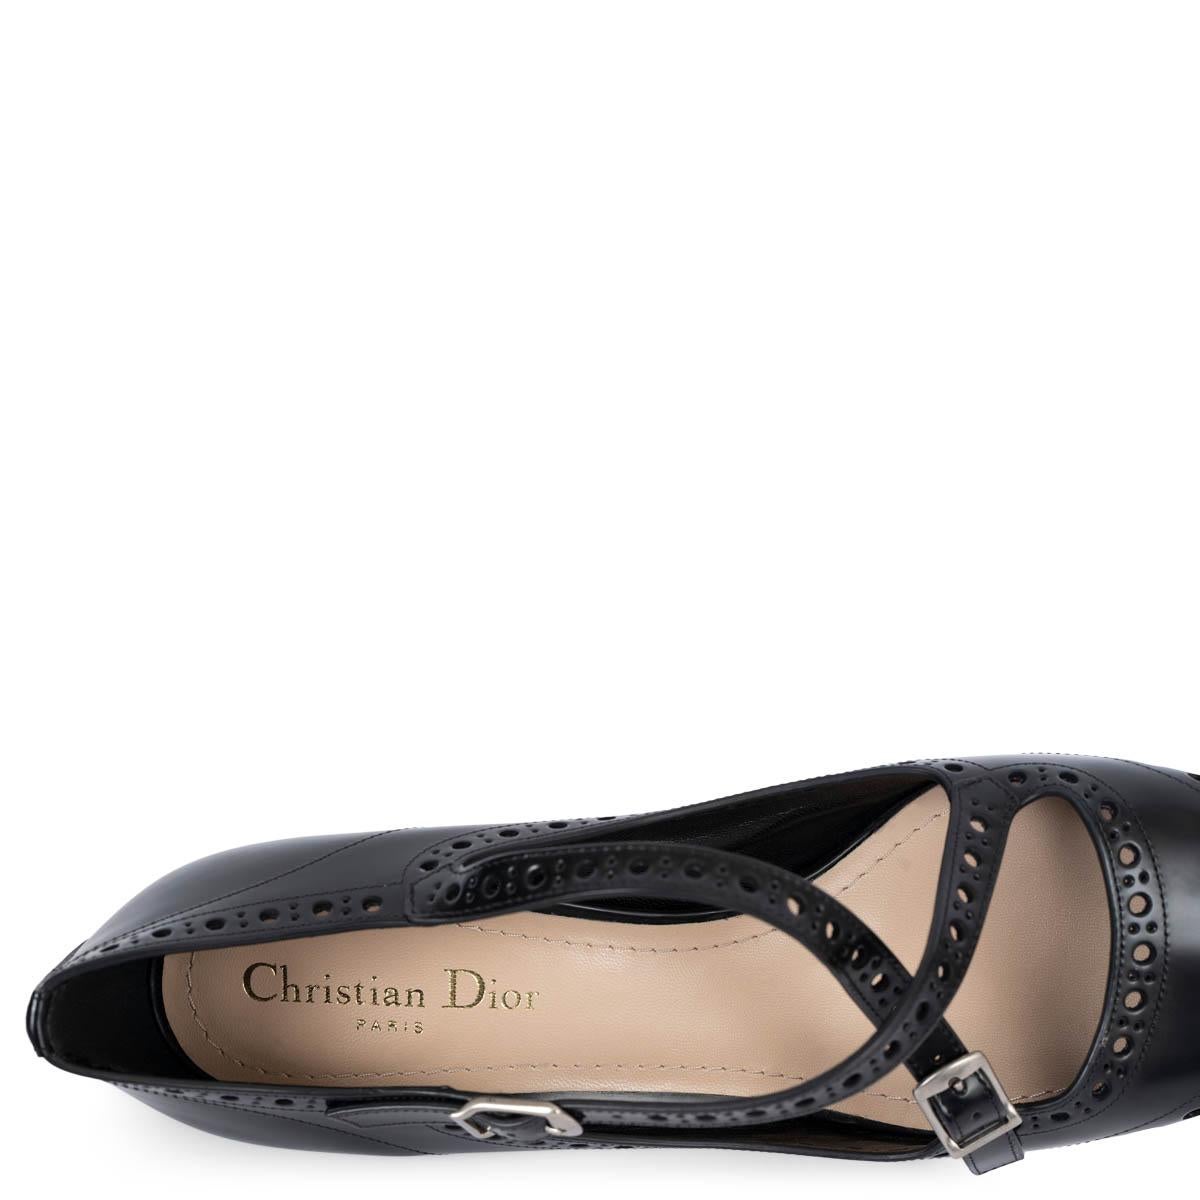 CHRISTIAN DIOR black leather 2019 TEDDY-D Pumps Shoes 40 For Sale 3